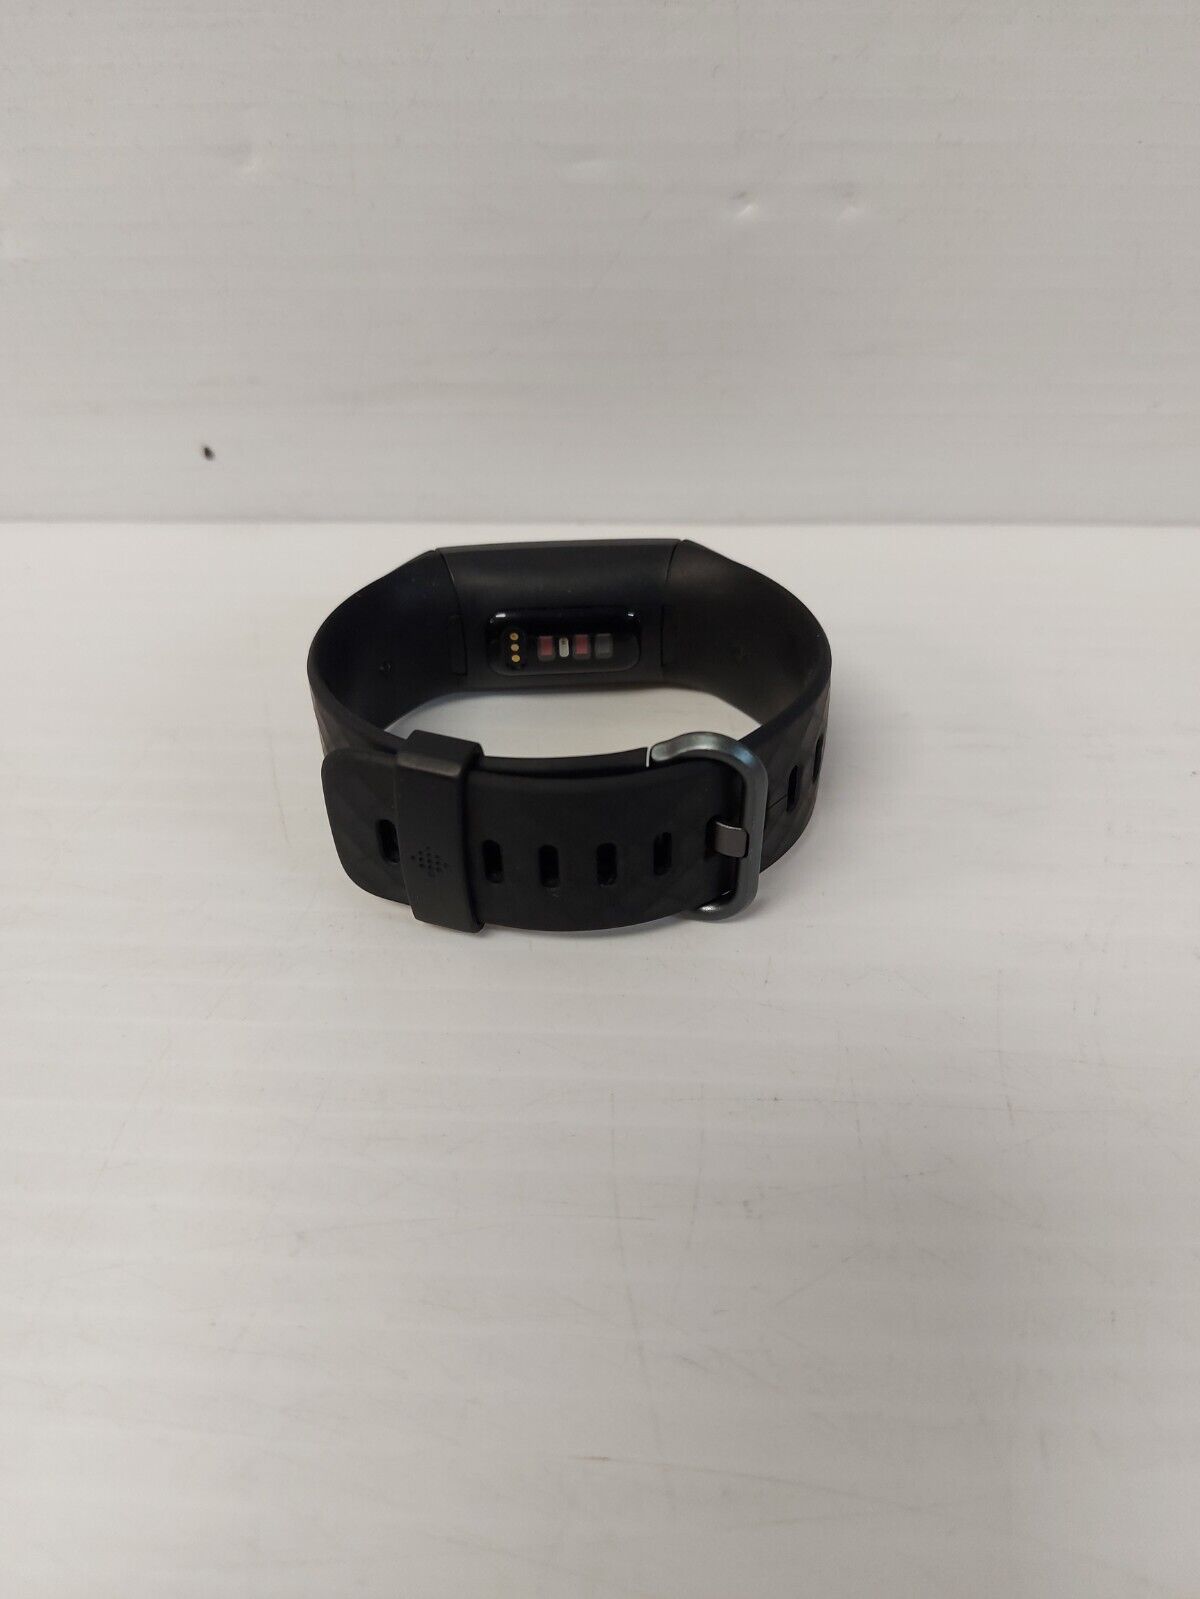 (N81663-2) Fitbit FB417 Smartwatch w/ charger